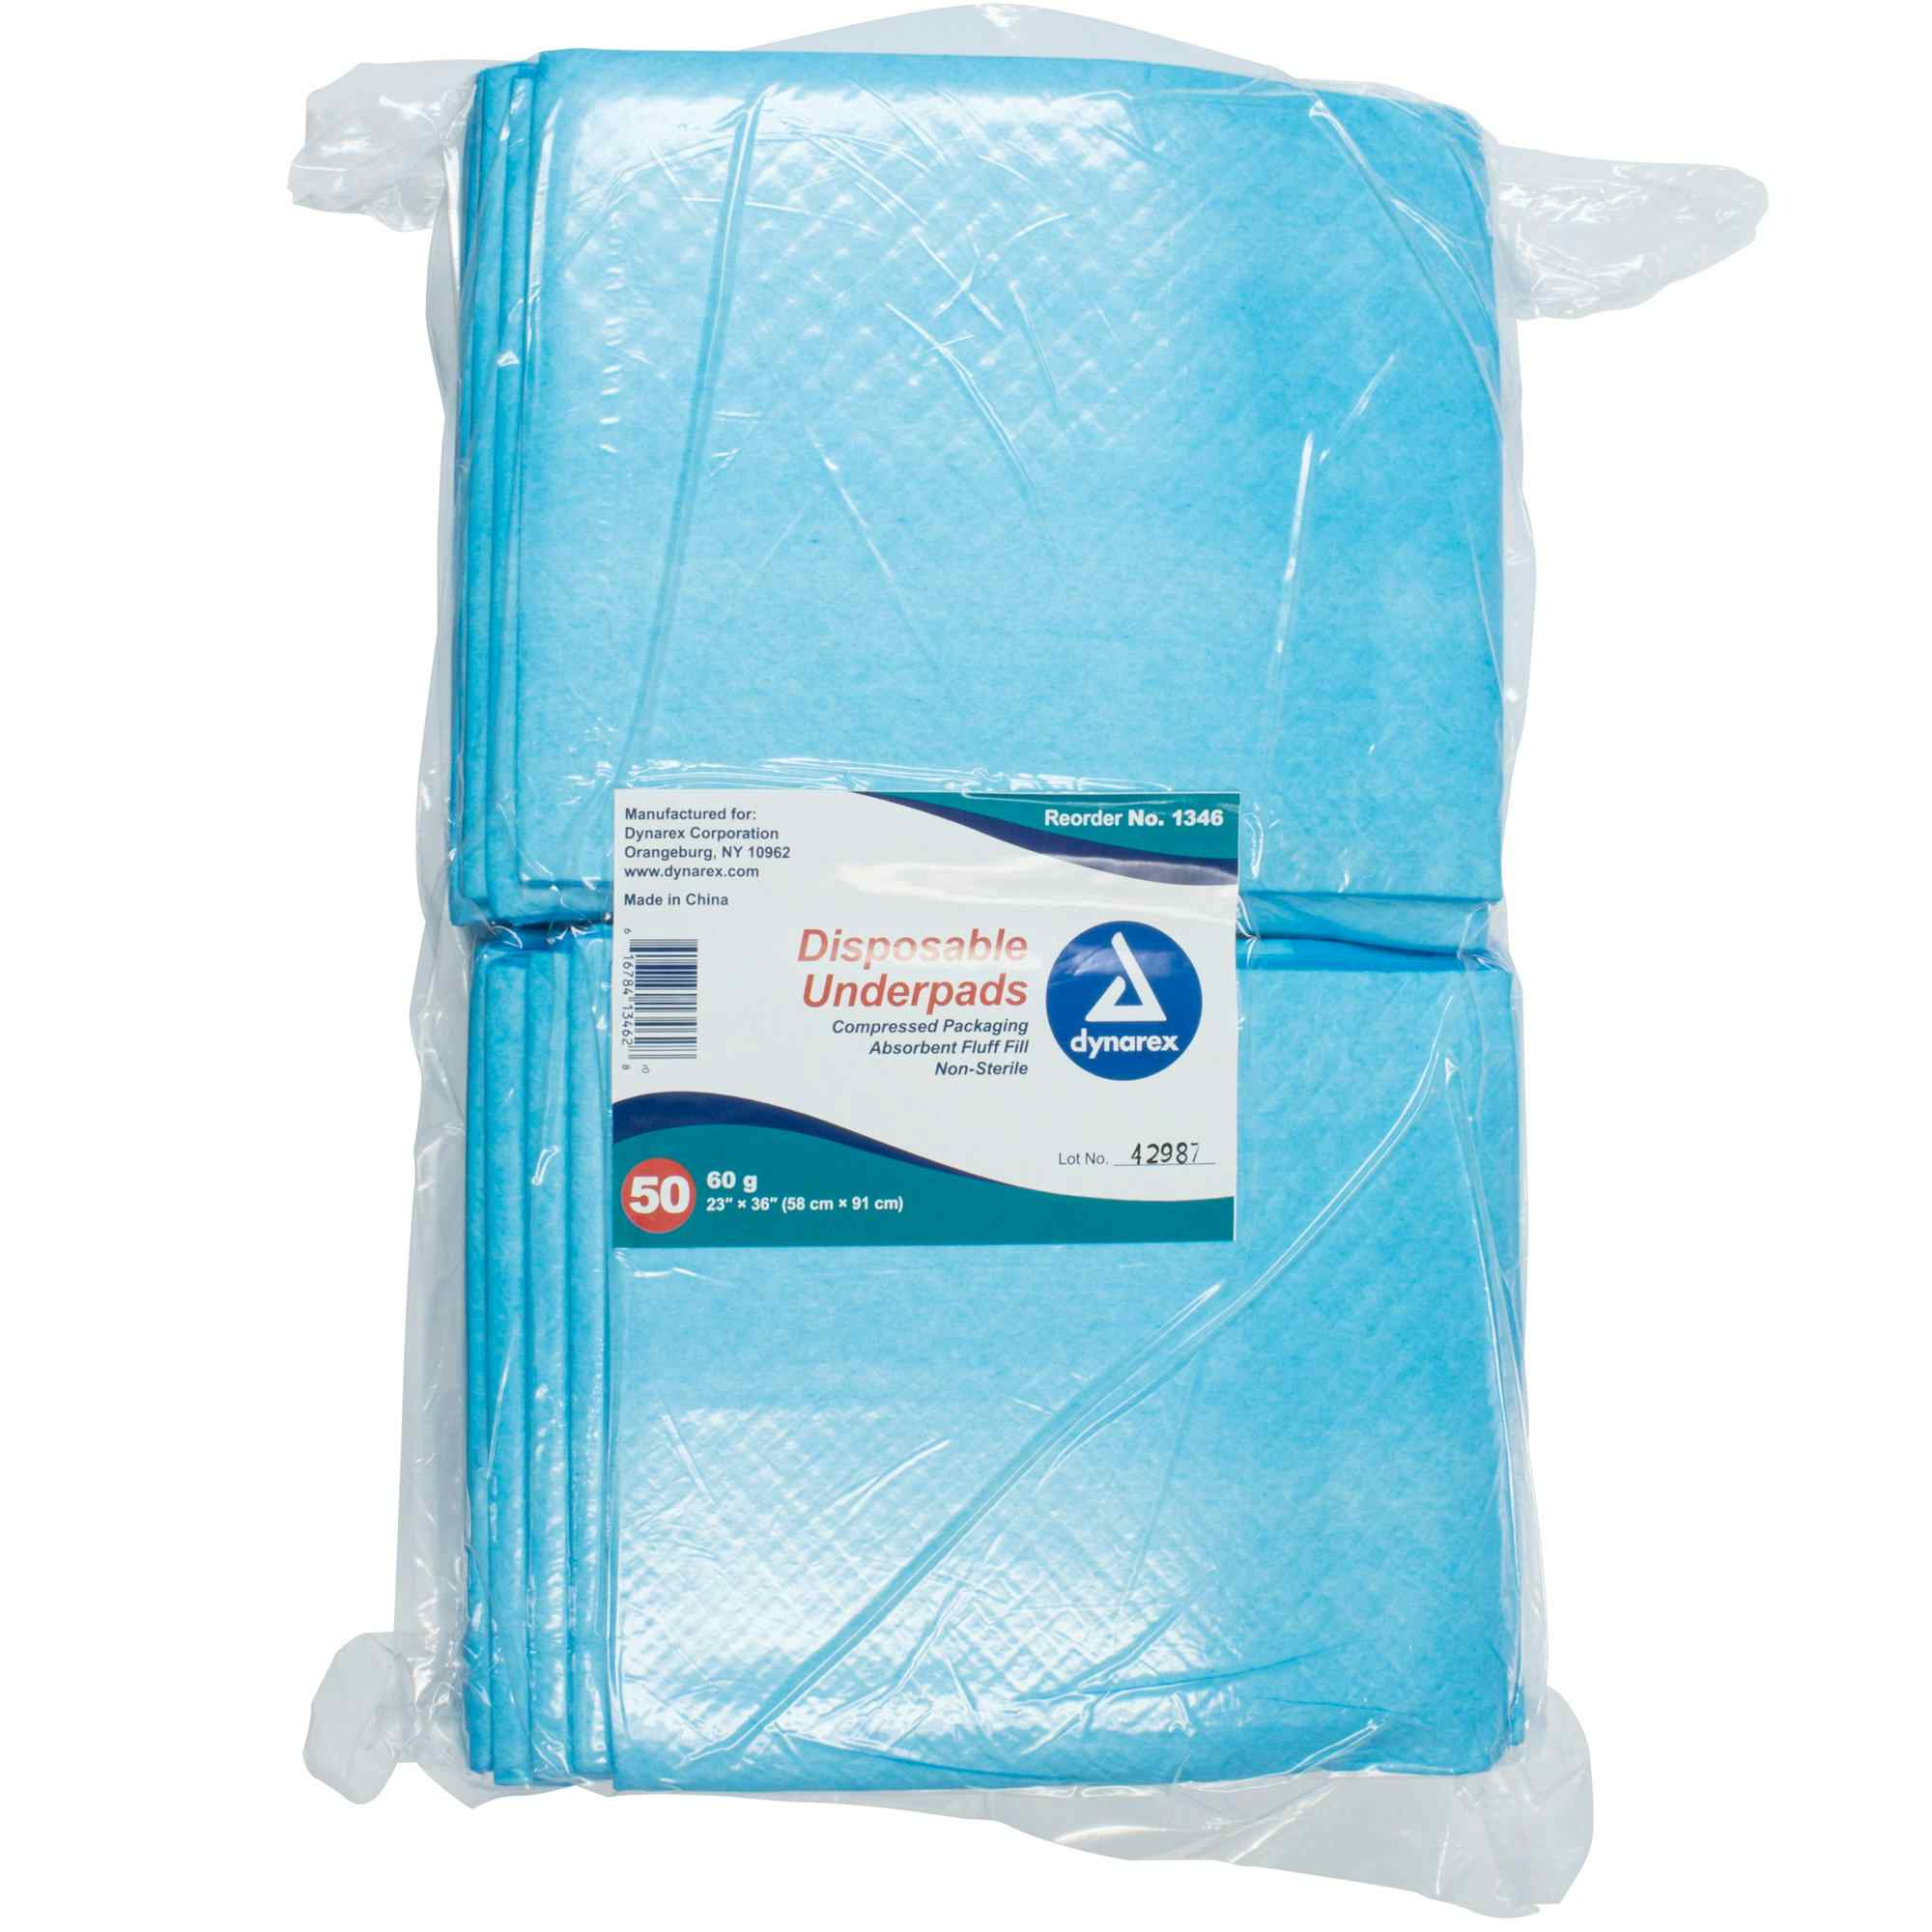 Dynarex Disposable Underpad, Light Absorbency, 1346, 23 X 36" - Case of 150